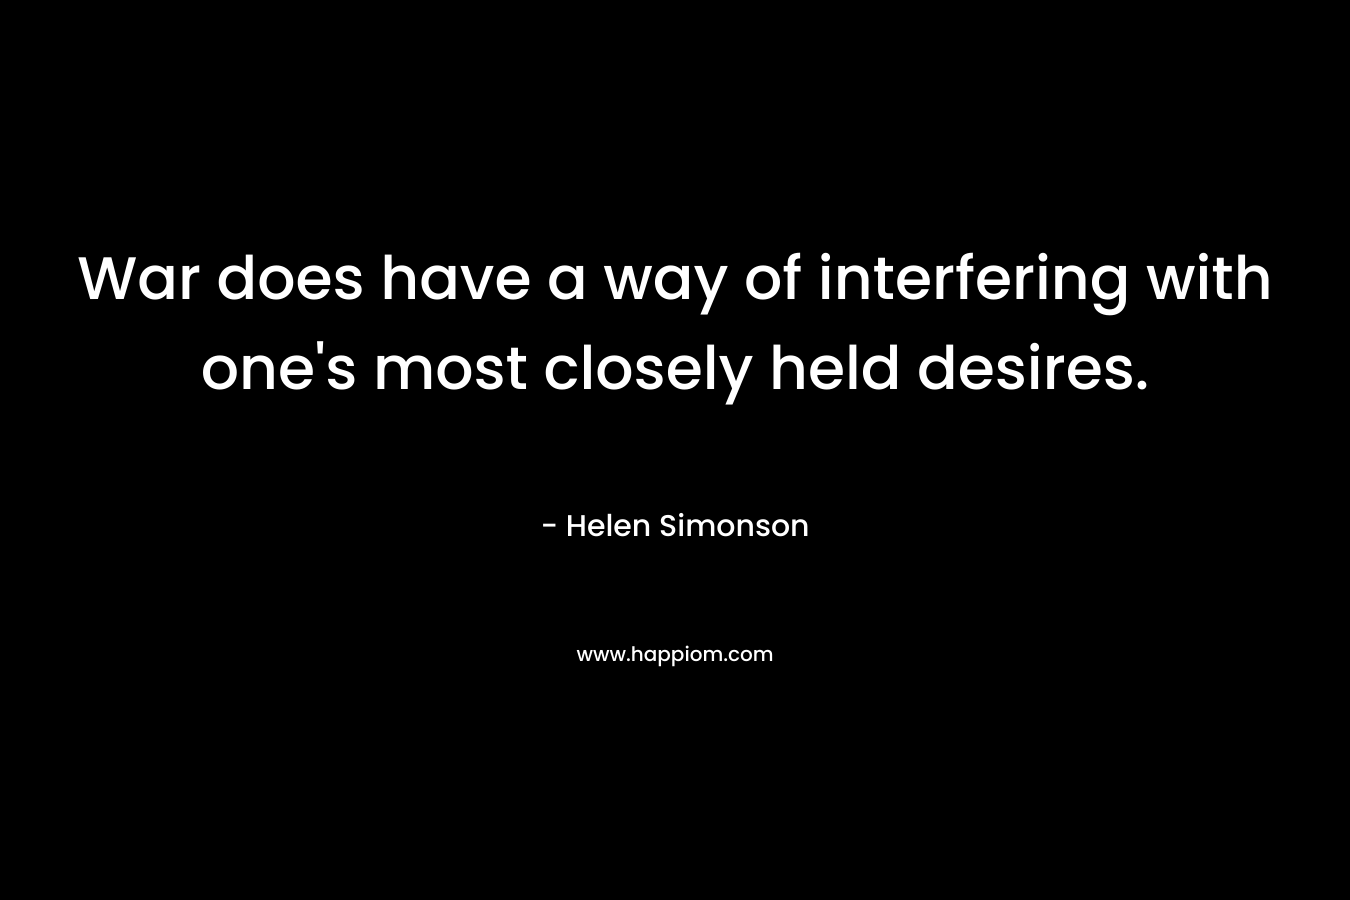 War does have a way of interfering with one’s most closely held desires. – Helen Simonson